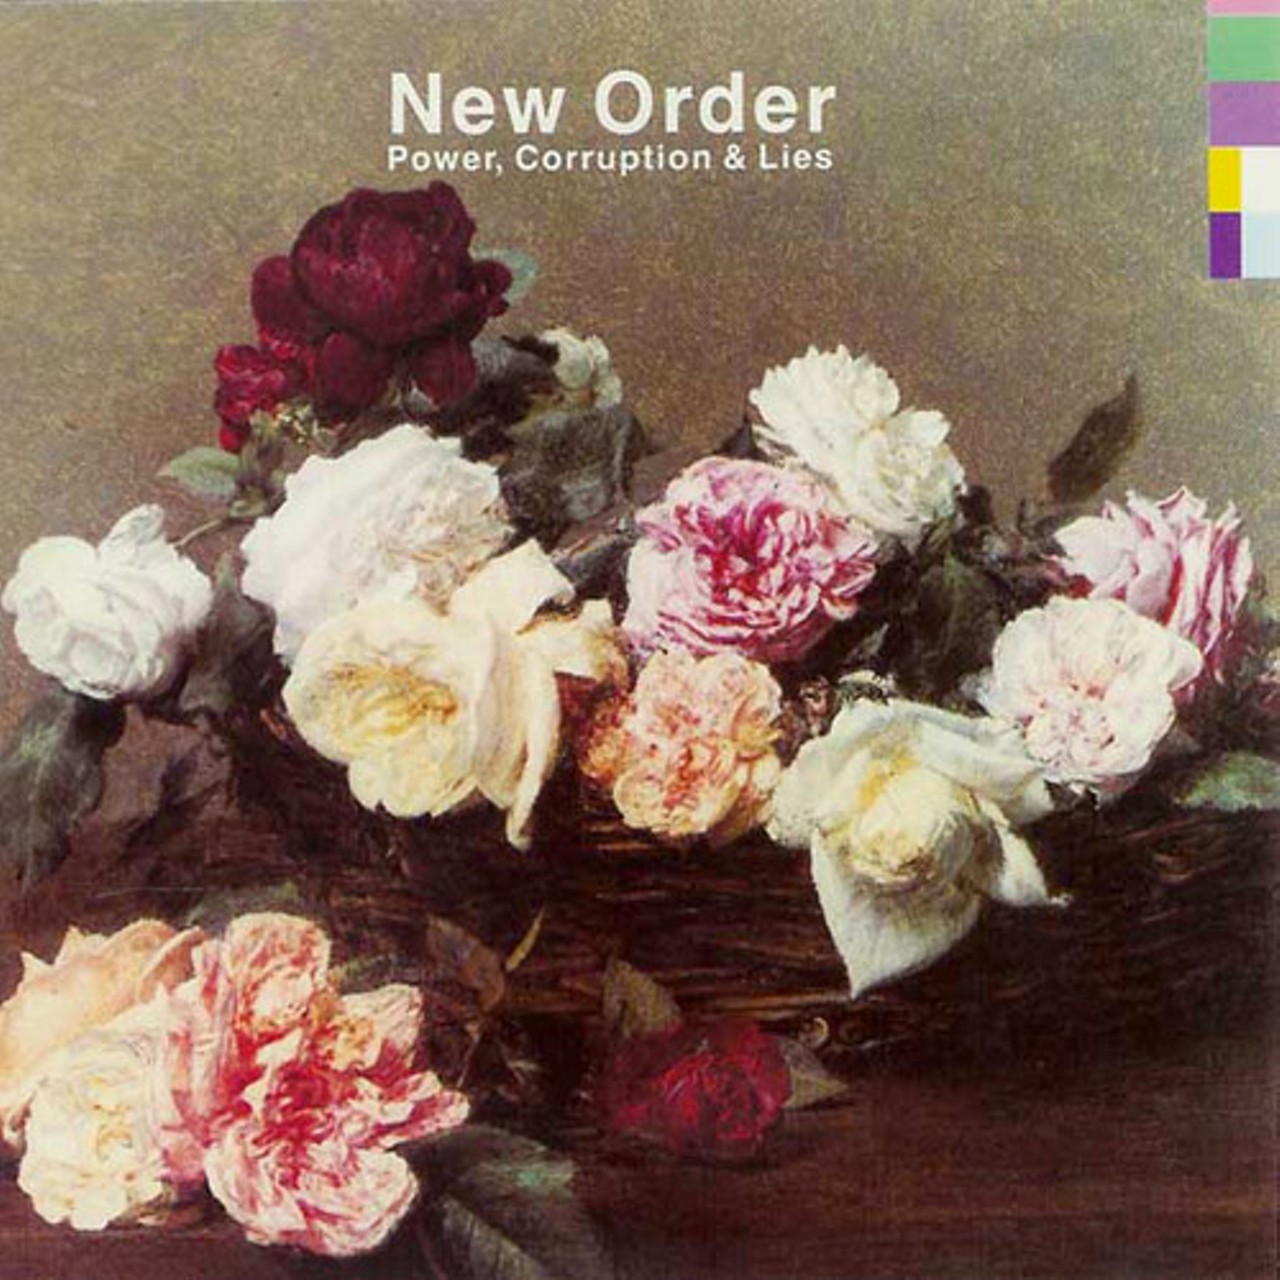 We put together a list of the albums that are worth thinking about, with notes on how they affect us. See if they have a similar impact on you.
New Order &#150; Power, Corruption, Lies
Feeling old and melancholy and need something to fill up some empty headspace? Here&#146;s your prescription:
